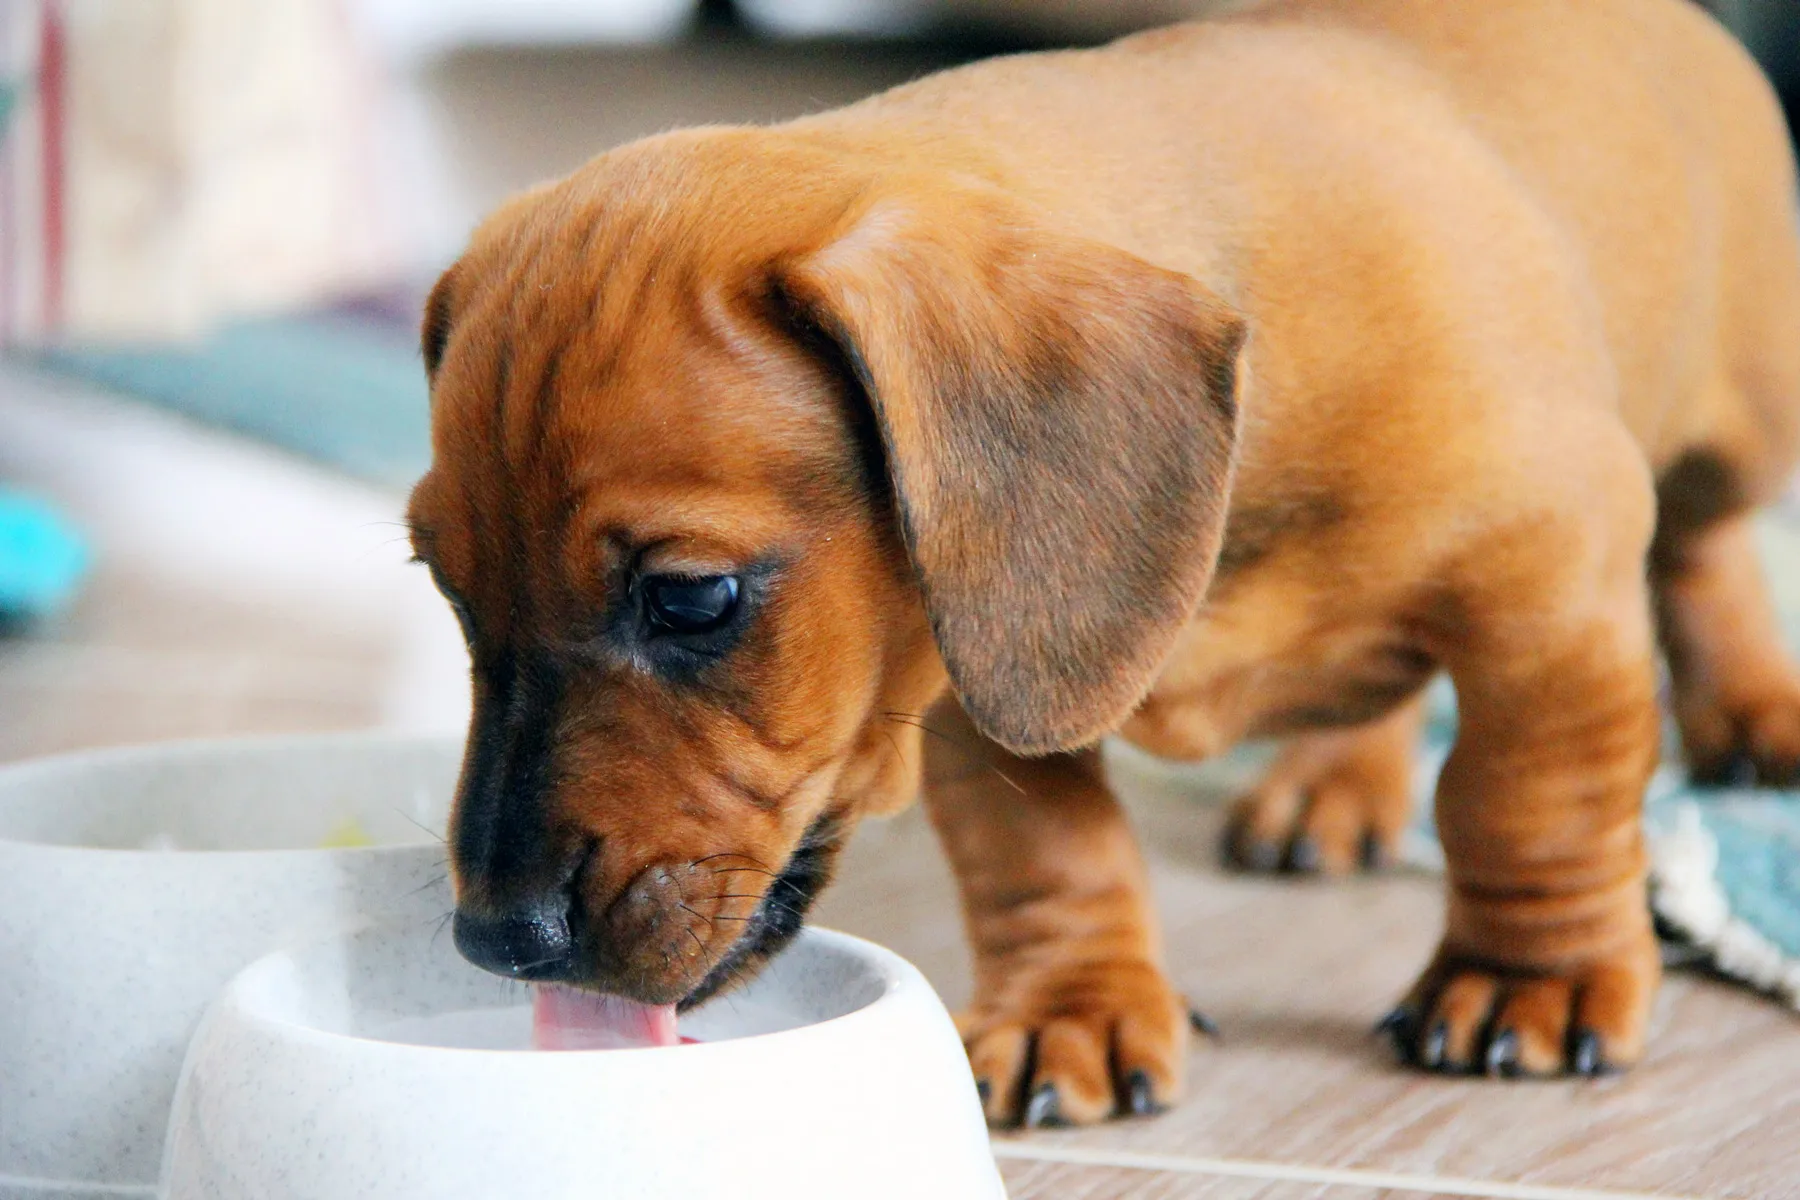 vitamins for dog to eat more